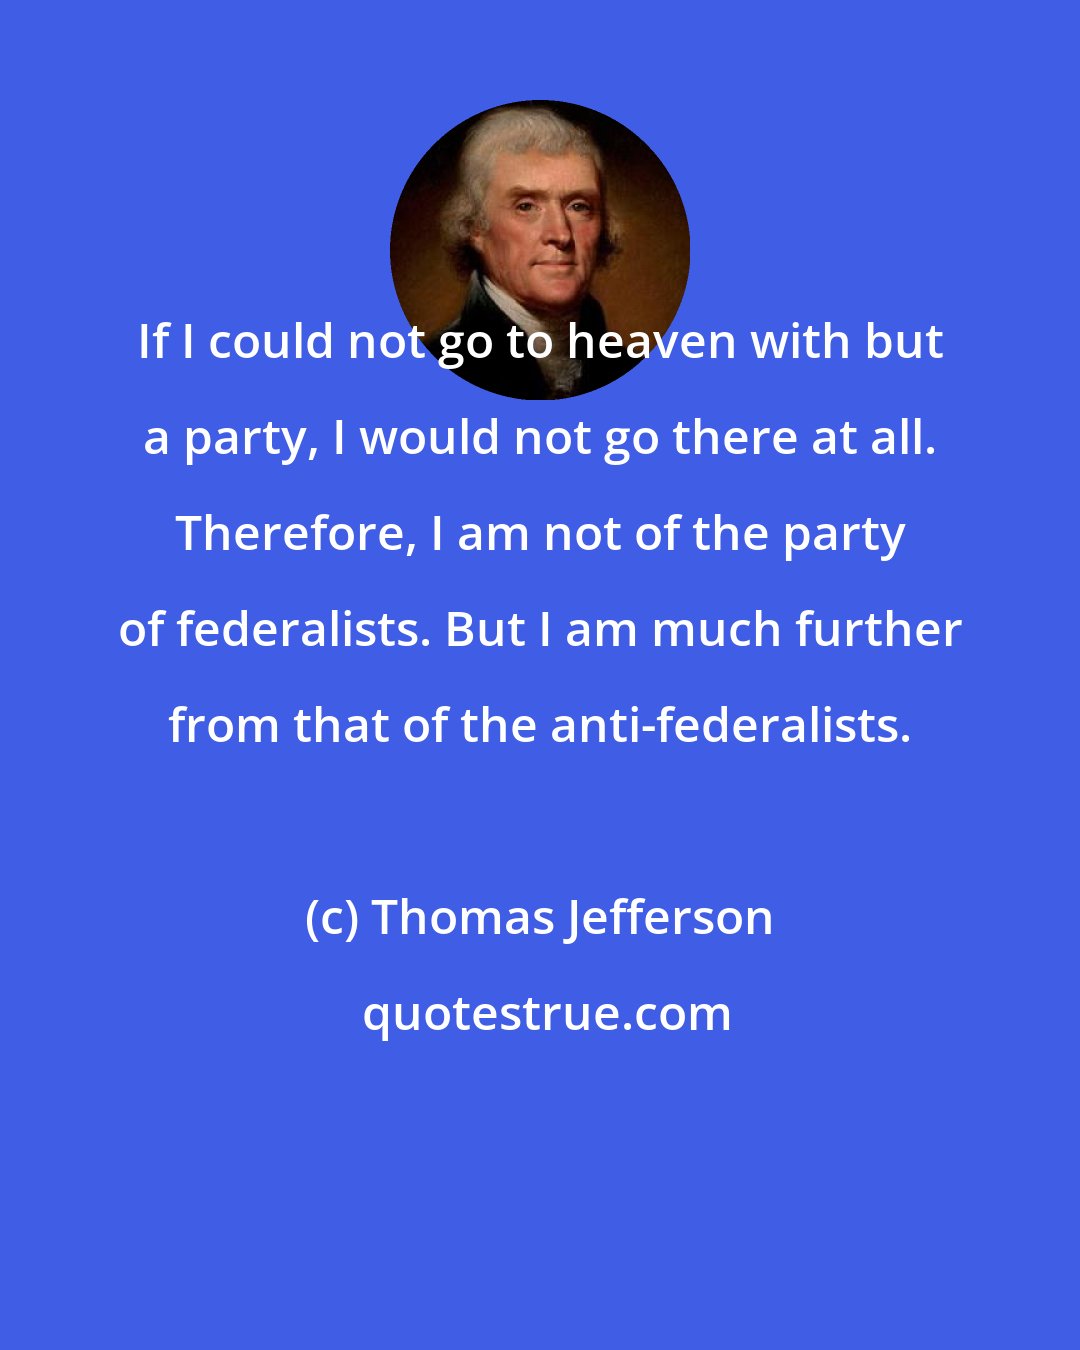 Thomas Jefferson: If I could not go to heaven with but a party, I would not go there at all. Therefore, I am not of the party of federalists. But I am much further from that of the anti-federalists.